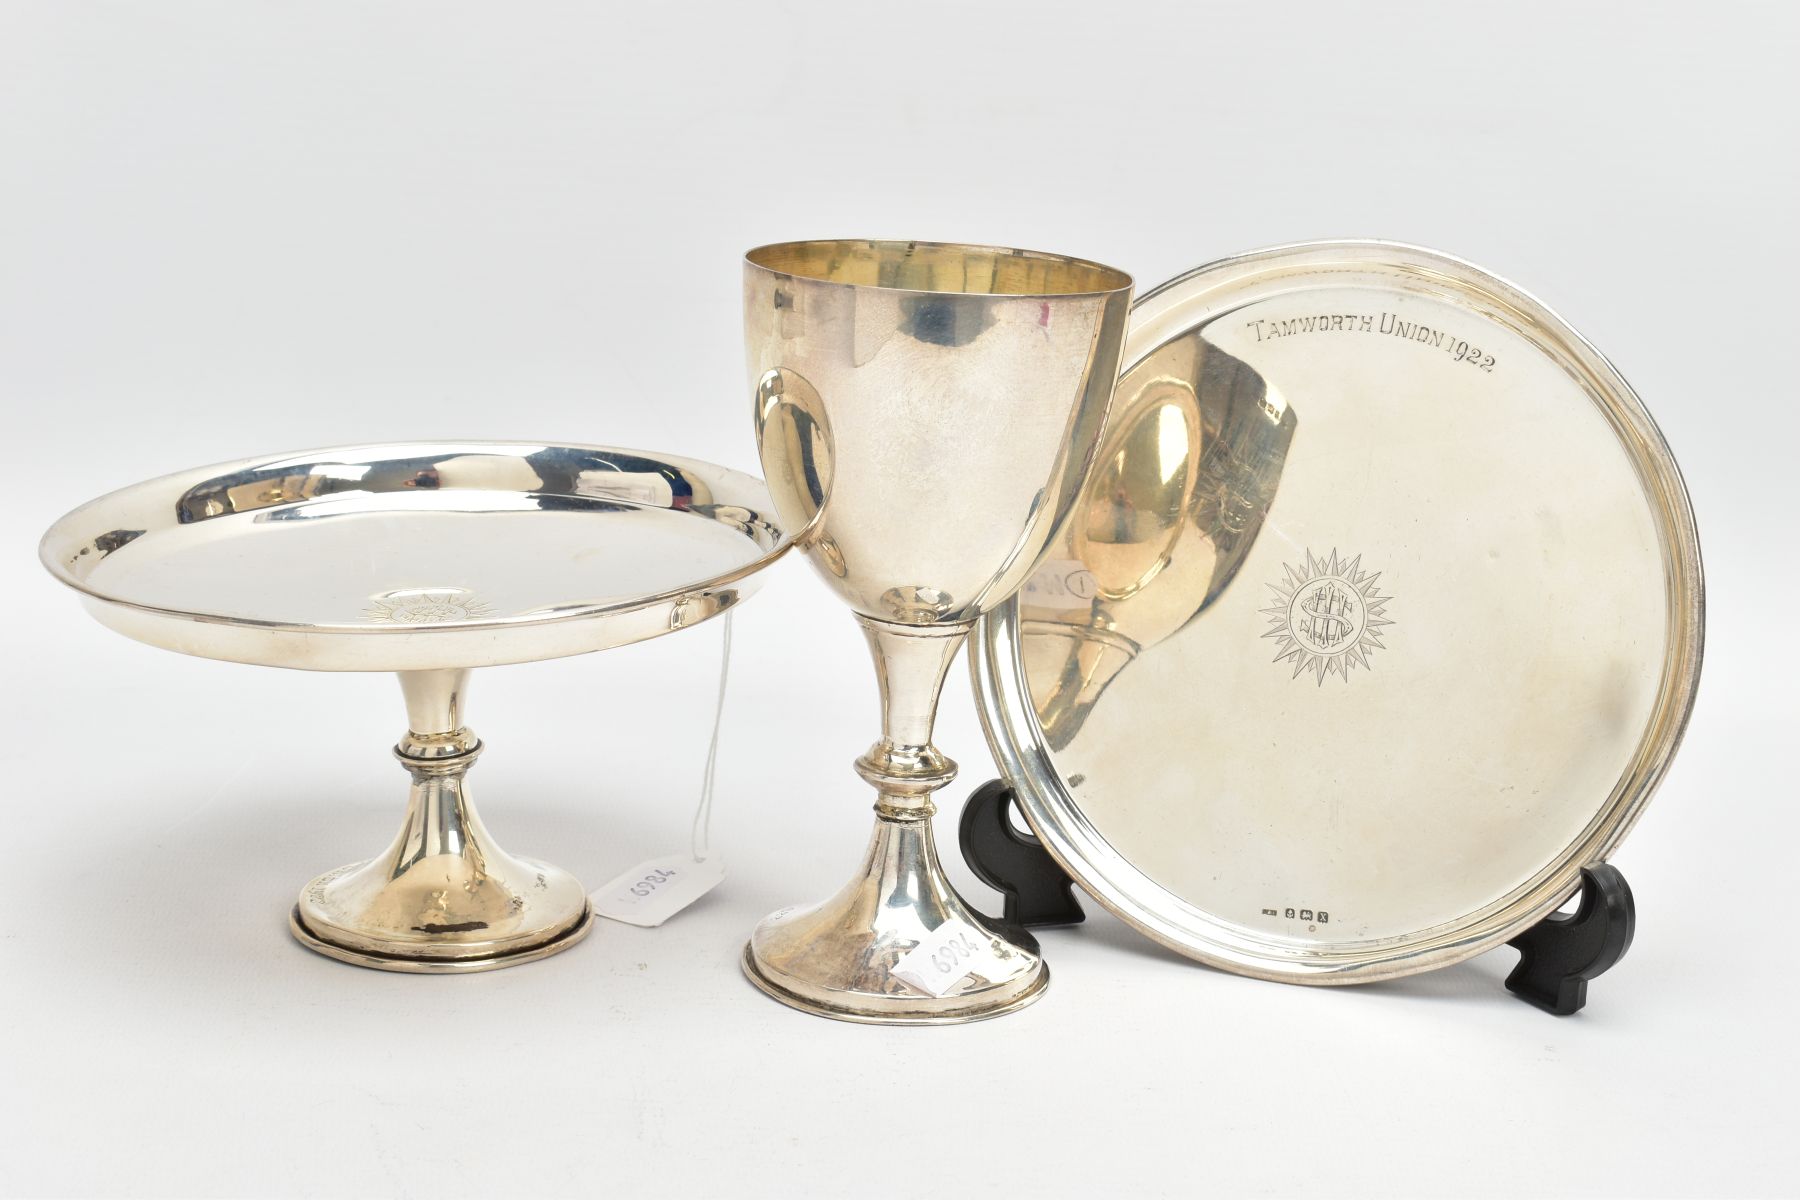 THREE SILVER ITEMS, to include a goblet of a plain polished design with an engraved motif, slight